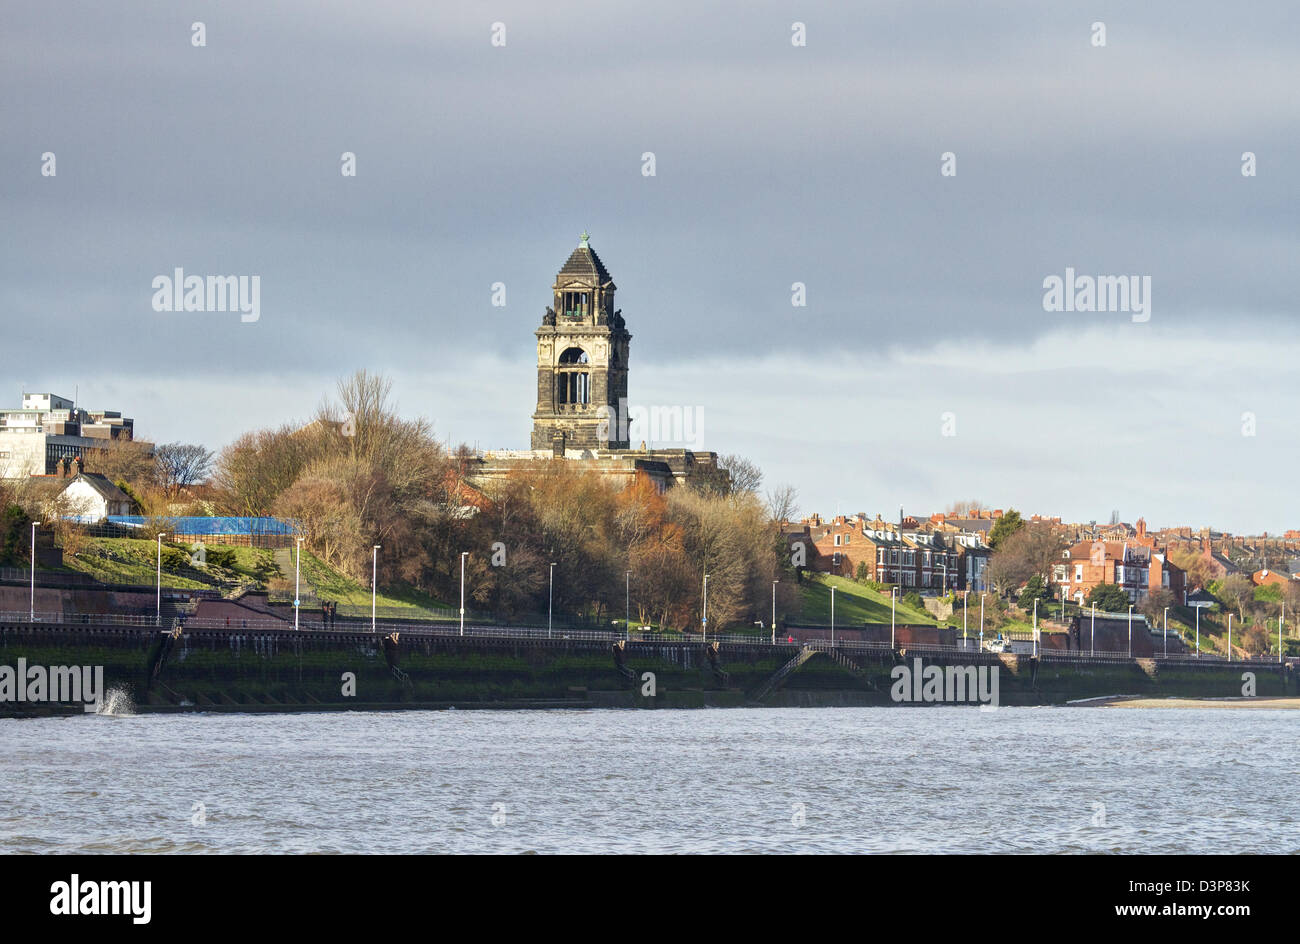 promenade from Seacombe to Egremont, with Wallasey town hall in background. Wallasey, Merseyside, England UK. February 2013 Stock Photo